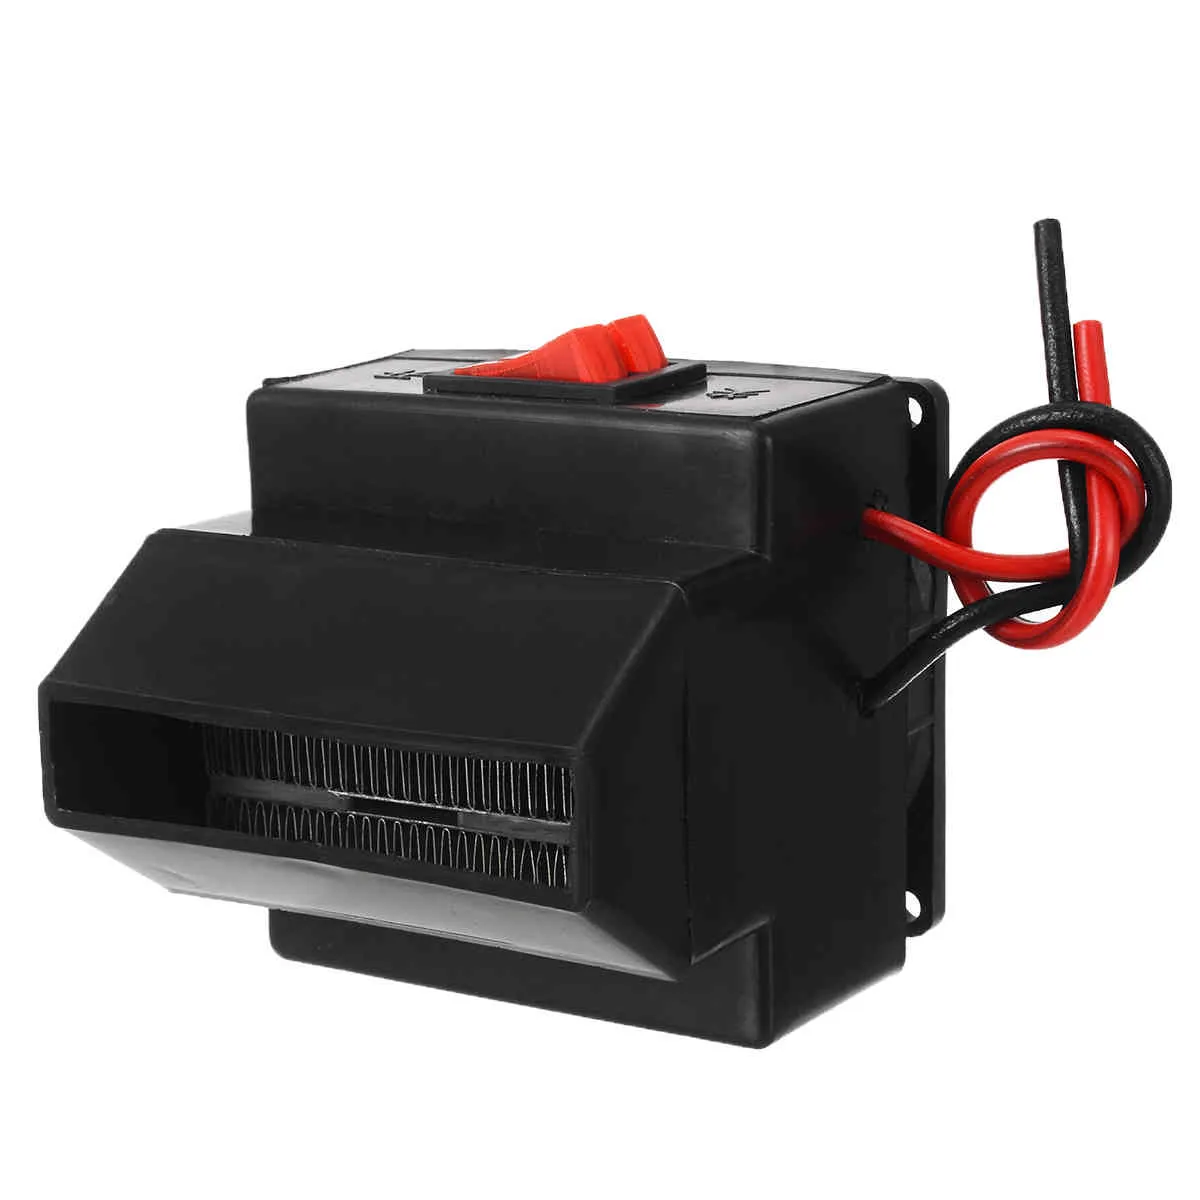 12V 300W Car Vehicle Heating Heater Hot Fan Driving Defroster Demister For Vehicle Portable Temperature Control Device